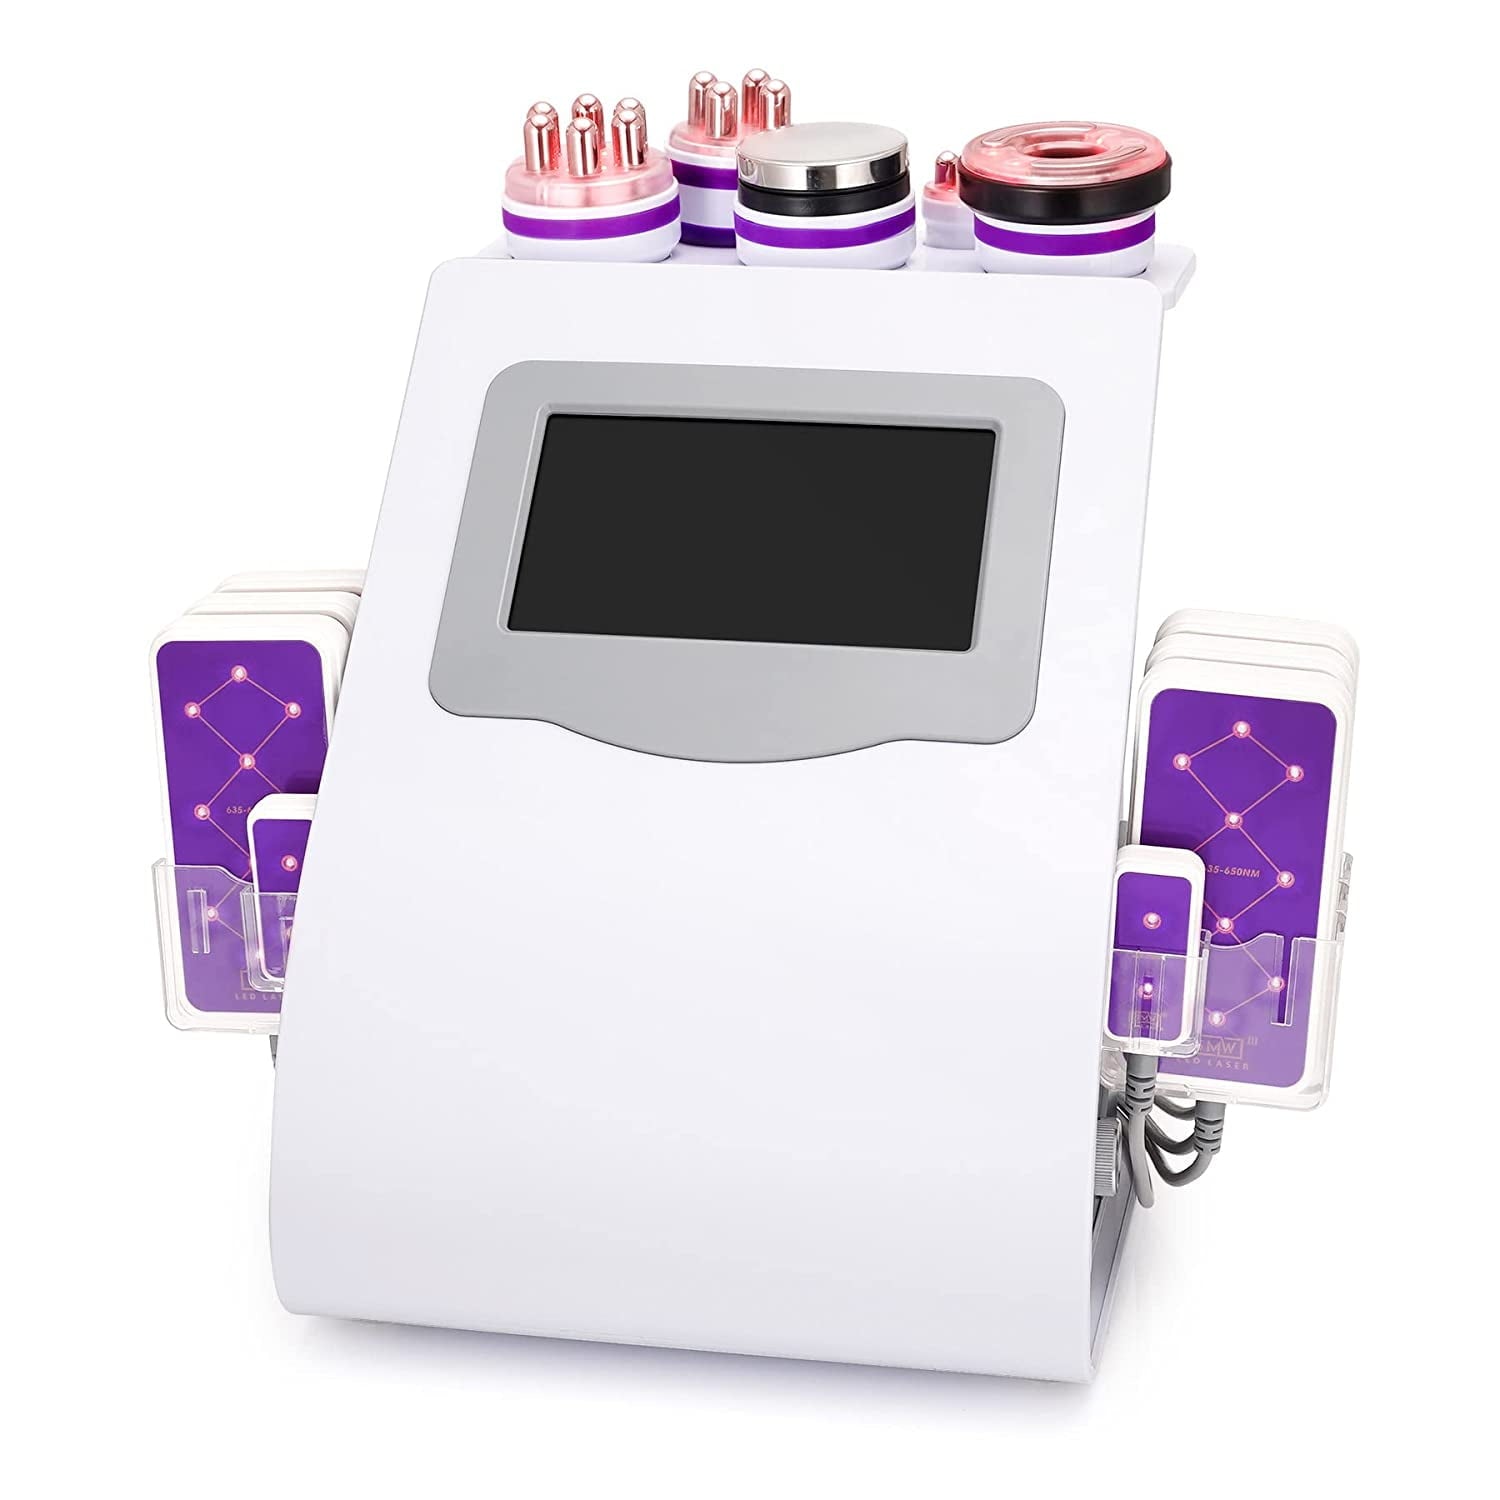 Suerbeaty 6in1 Vacuum Radio Frequency Slimming Cellulite Body Massage Machine For Home Spa Use